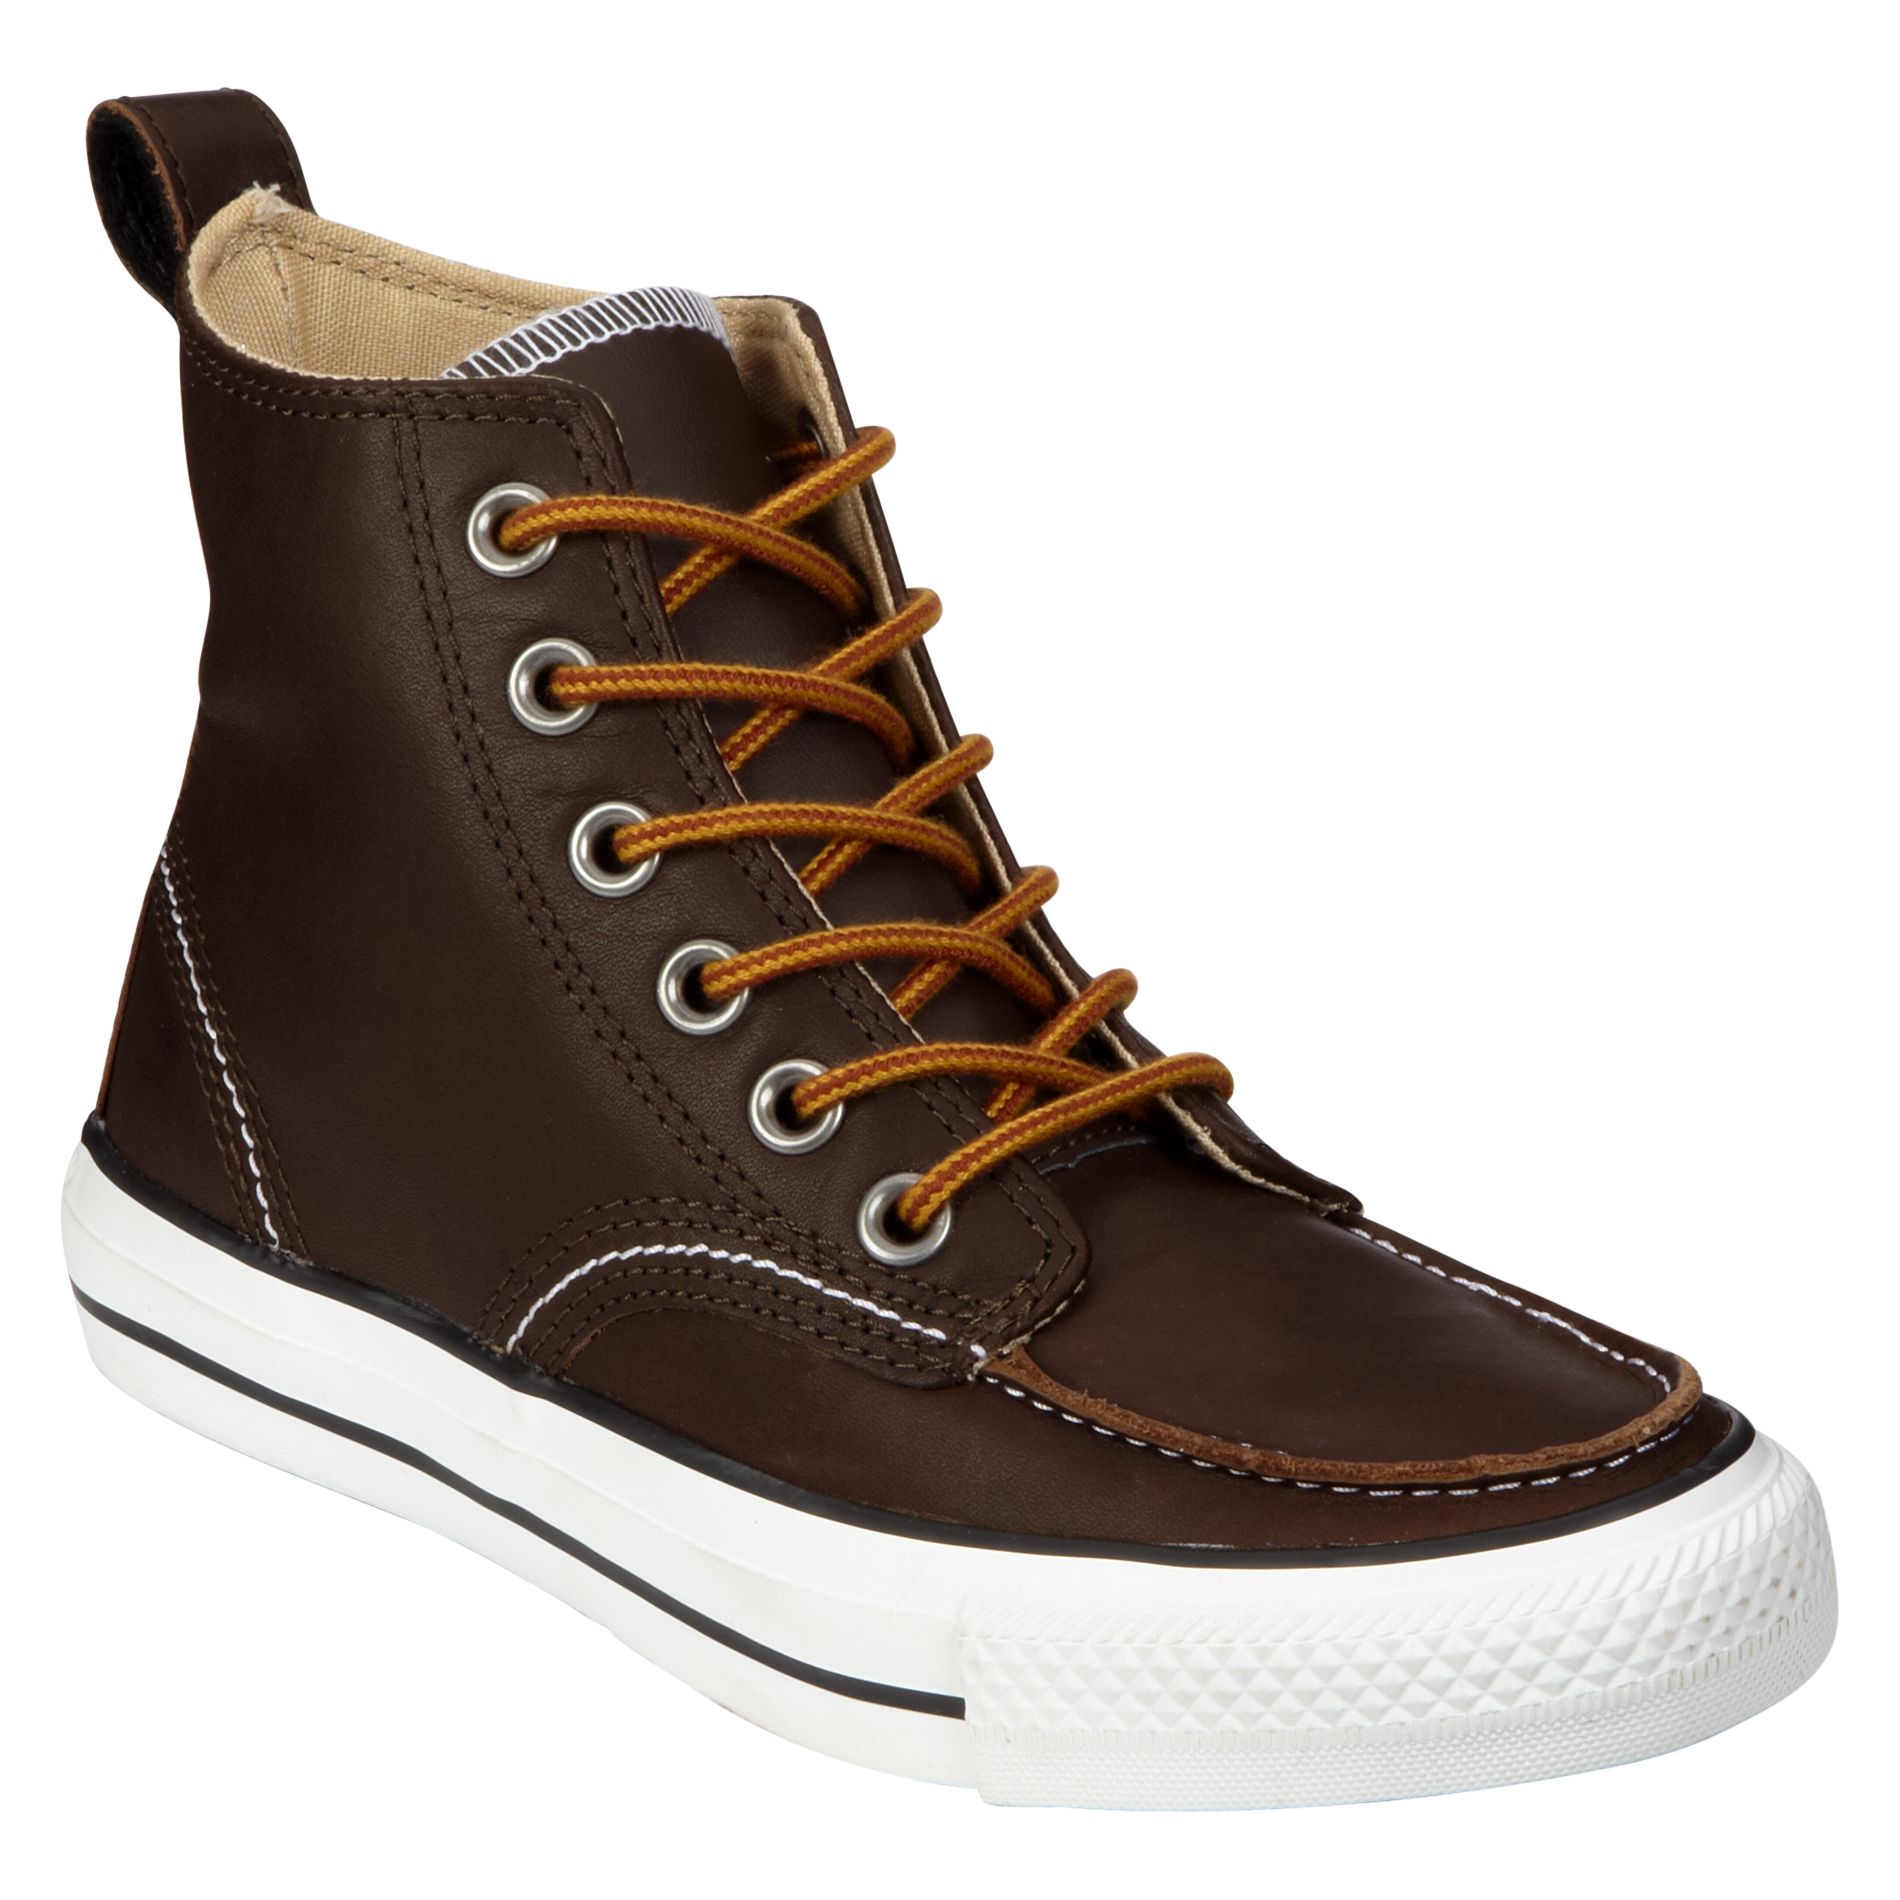 Unisex Chuck Taylor All Star Classic Boot - Brown